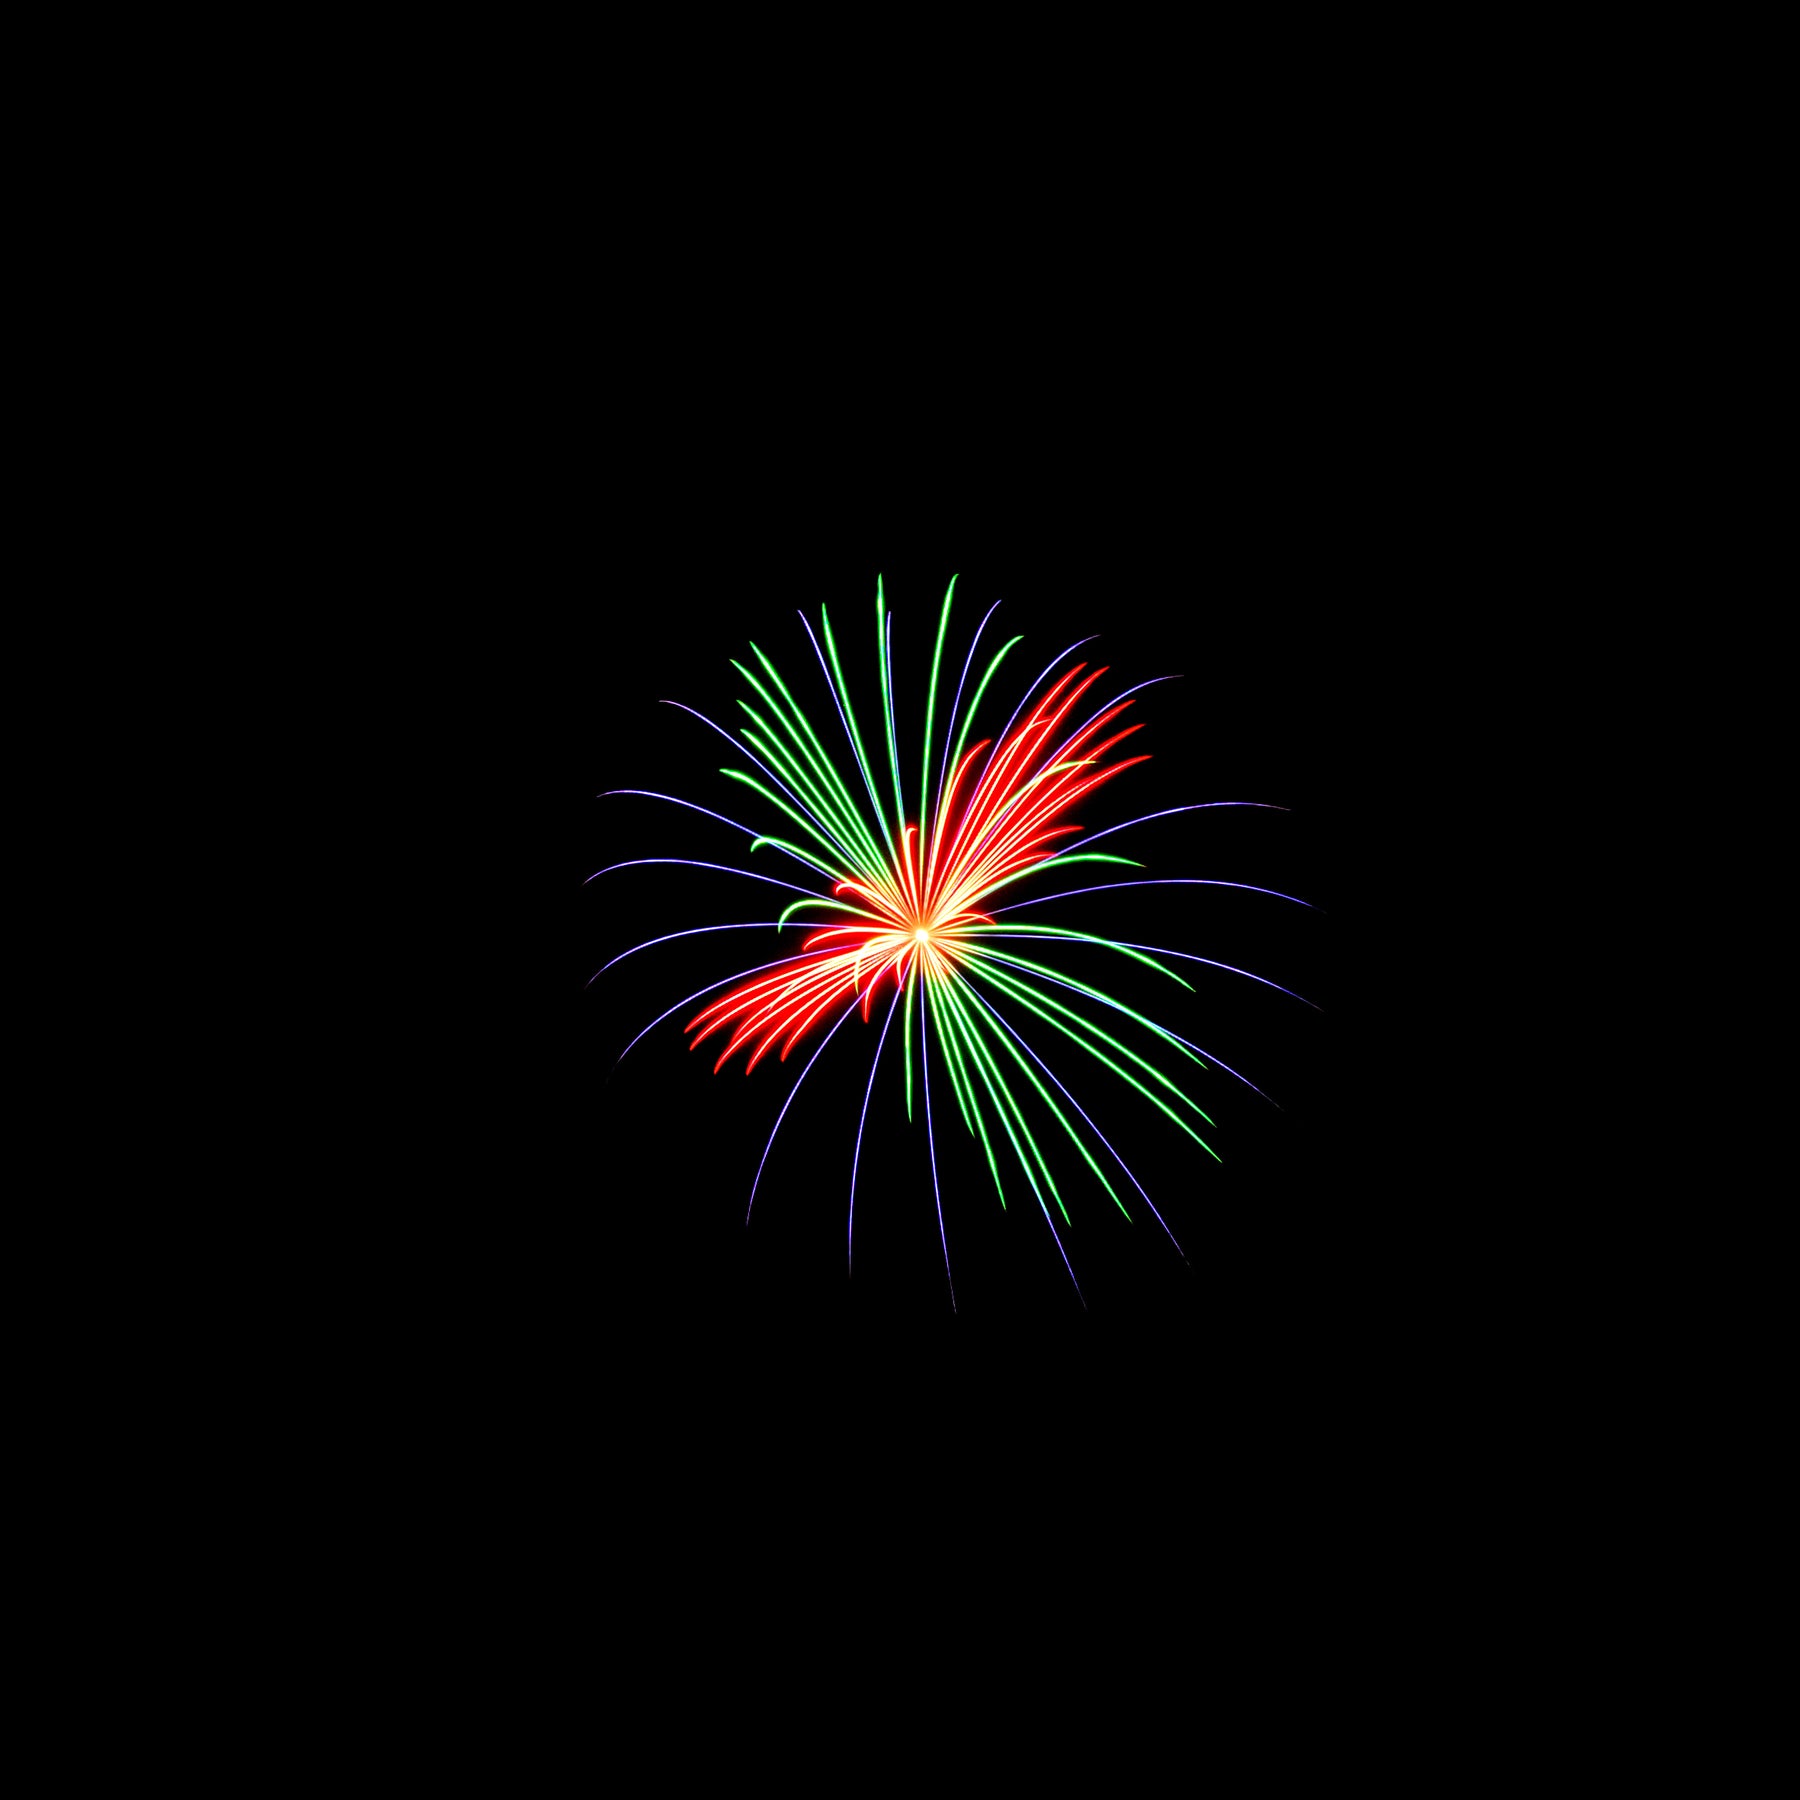 More Awesome Firework Videos